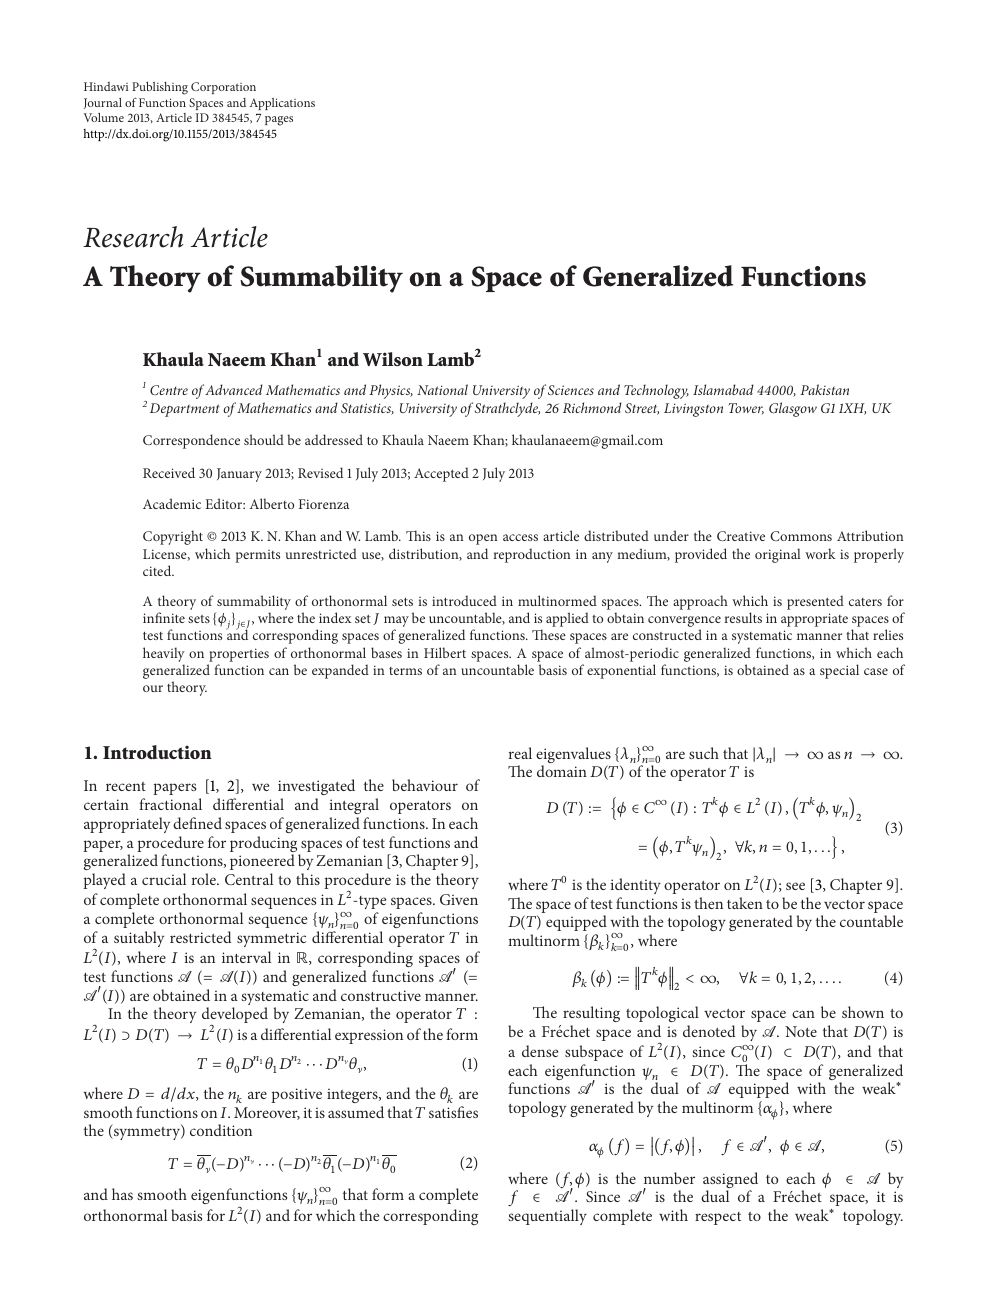 A Theory Of Summability On A Space Of Generalized Functions Topic Of Research Paper In Mathematics Download Scholarly Article Pdf And Read For Free On Cyberleninka Open Science Hub